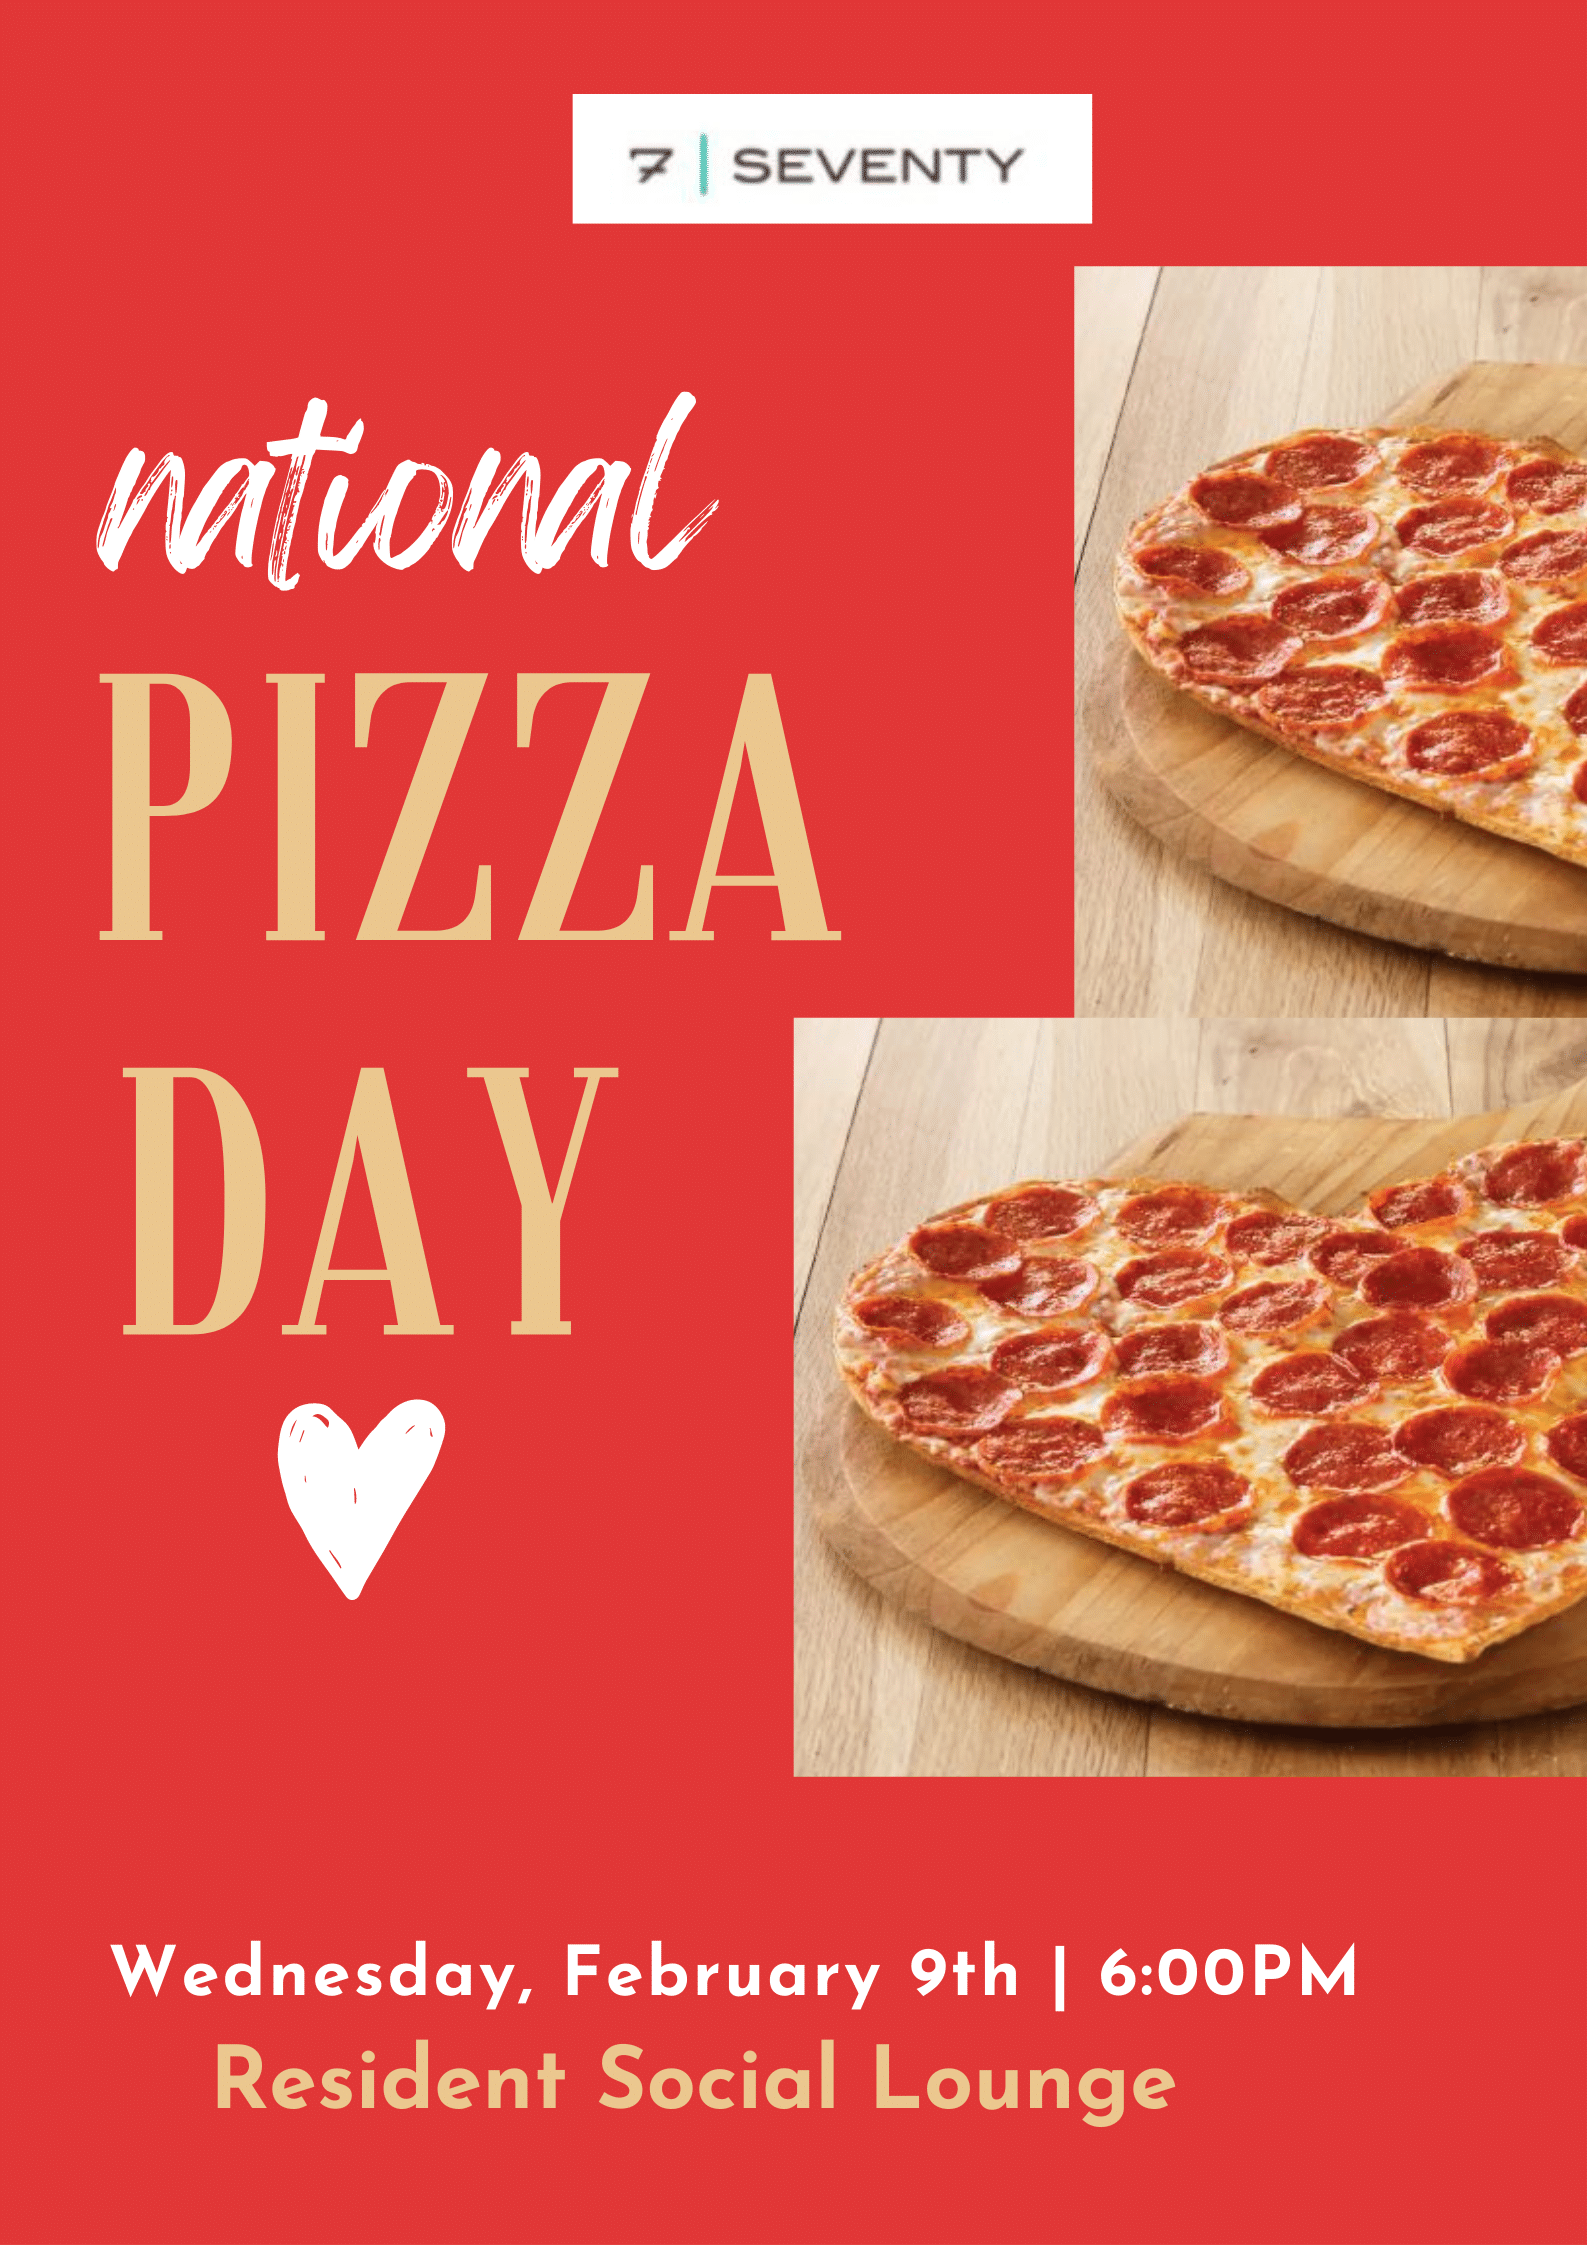 Apartments in Houston’s Energy Corridor On National Pizza Day, don't miss out on our mouthwatering flyer featuring the best pizza deals in Houston's Energy Corridor. Whether you're looking for apartments for rent or simply want to indulge